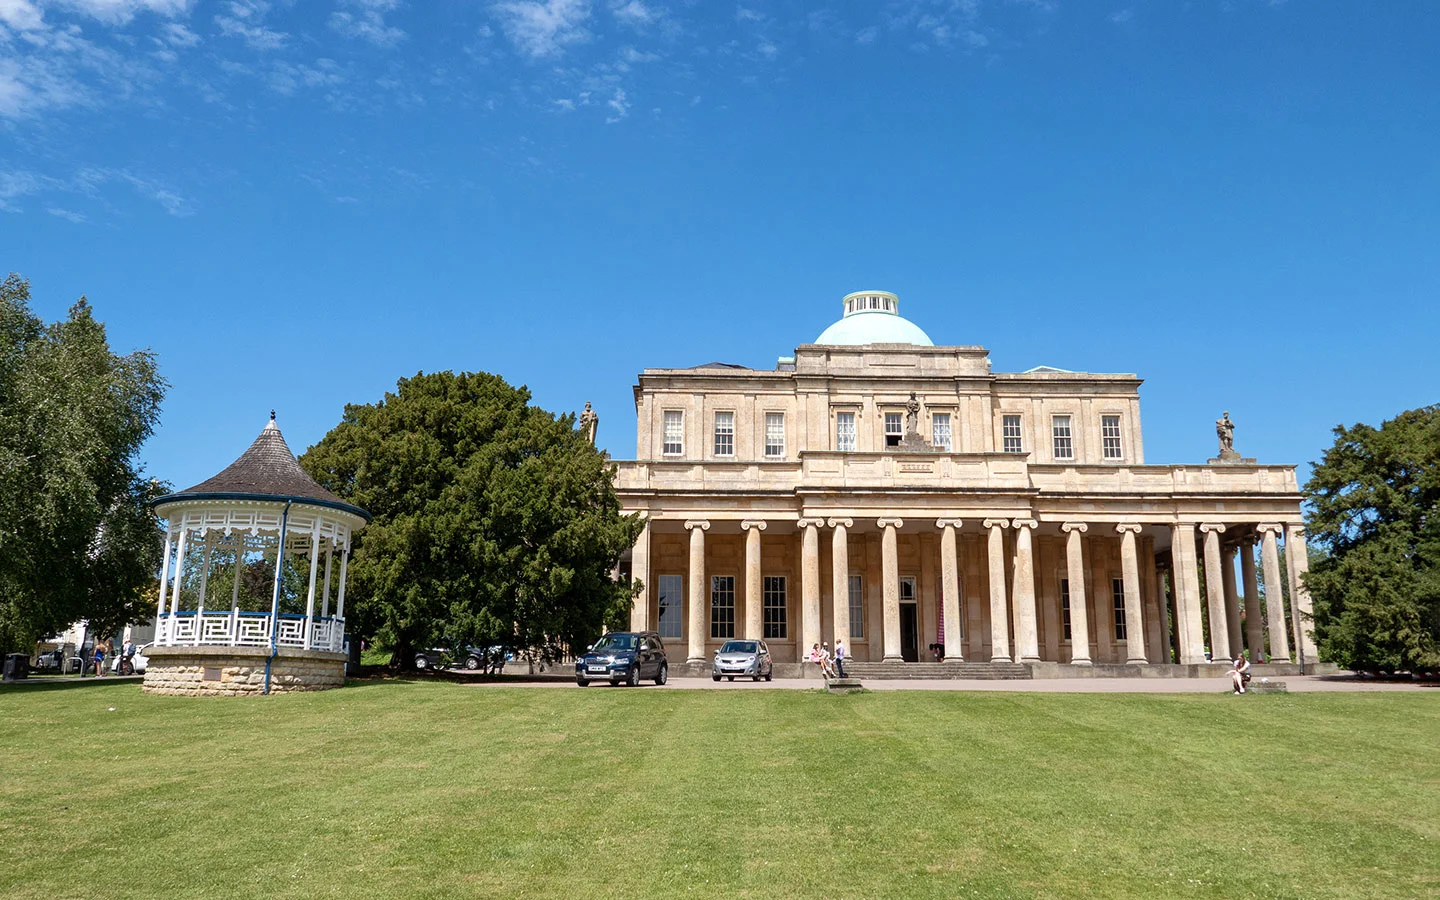 Pittville Pump Room and Park in Cheltenham